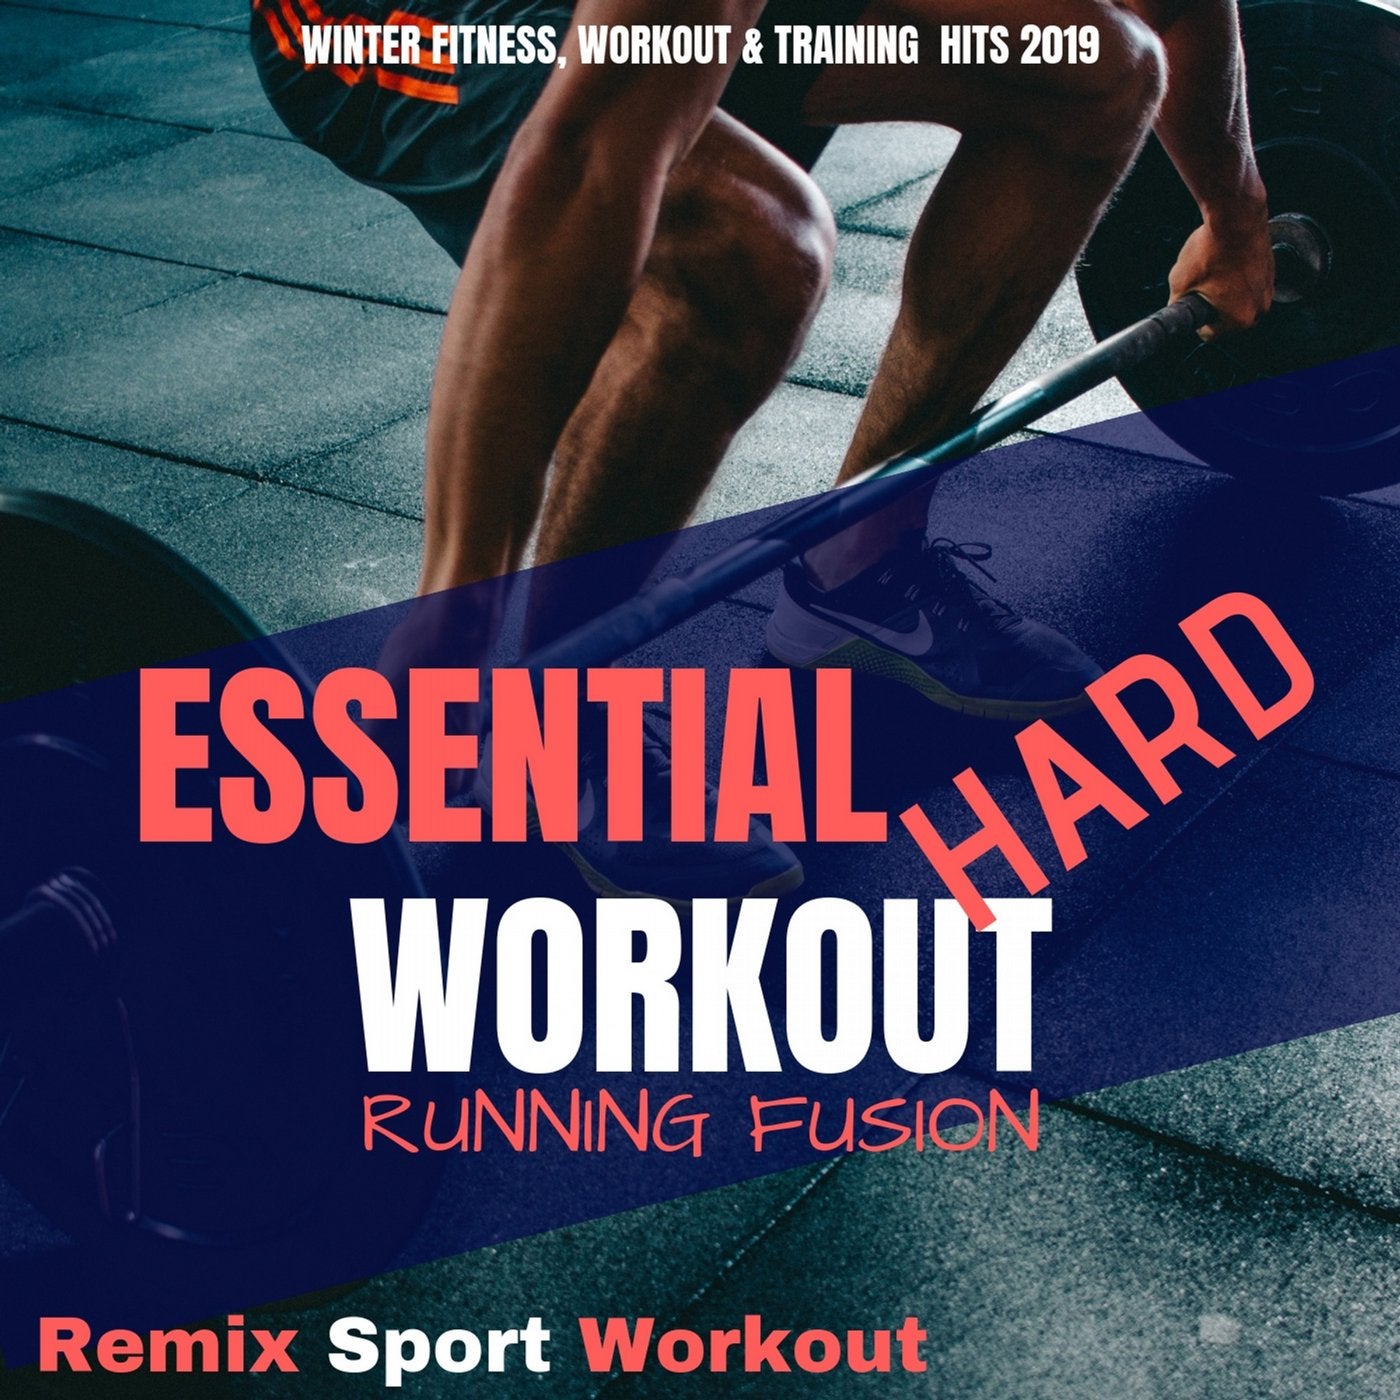 Essential Hard Workout Fitness Running Fusion (Winter Fitness, Workout & Training Hits 2019)